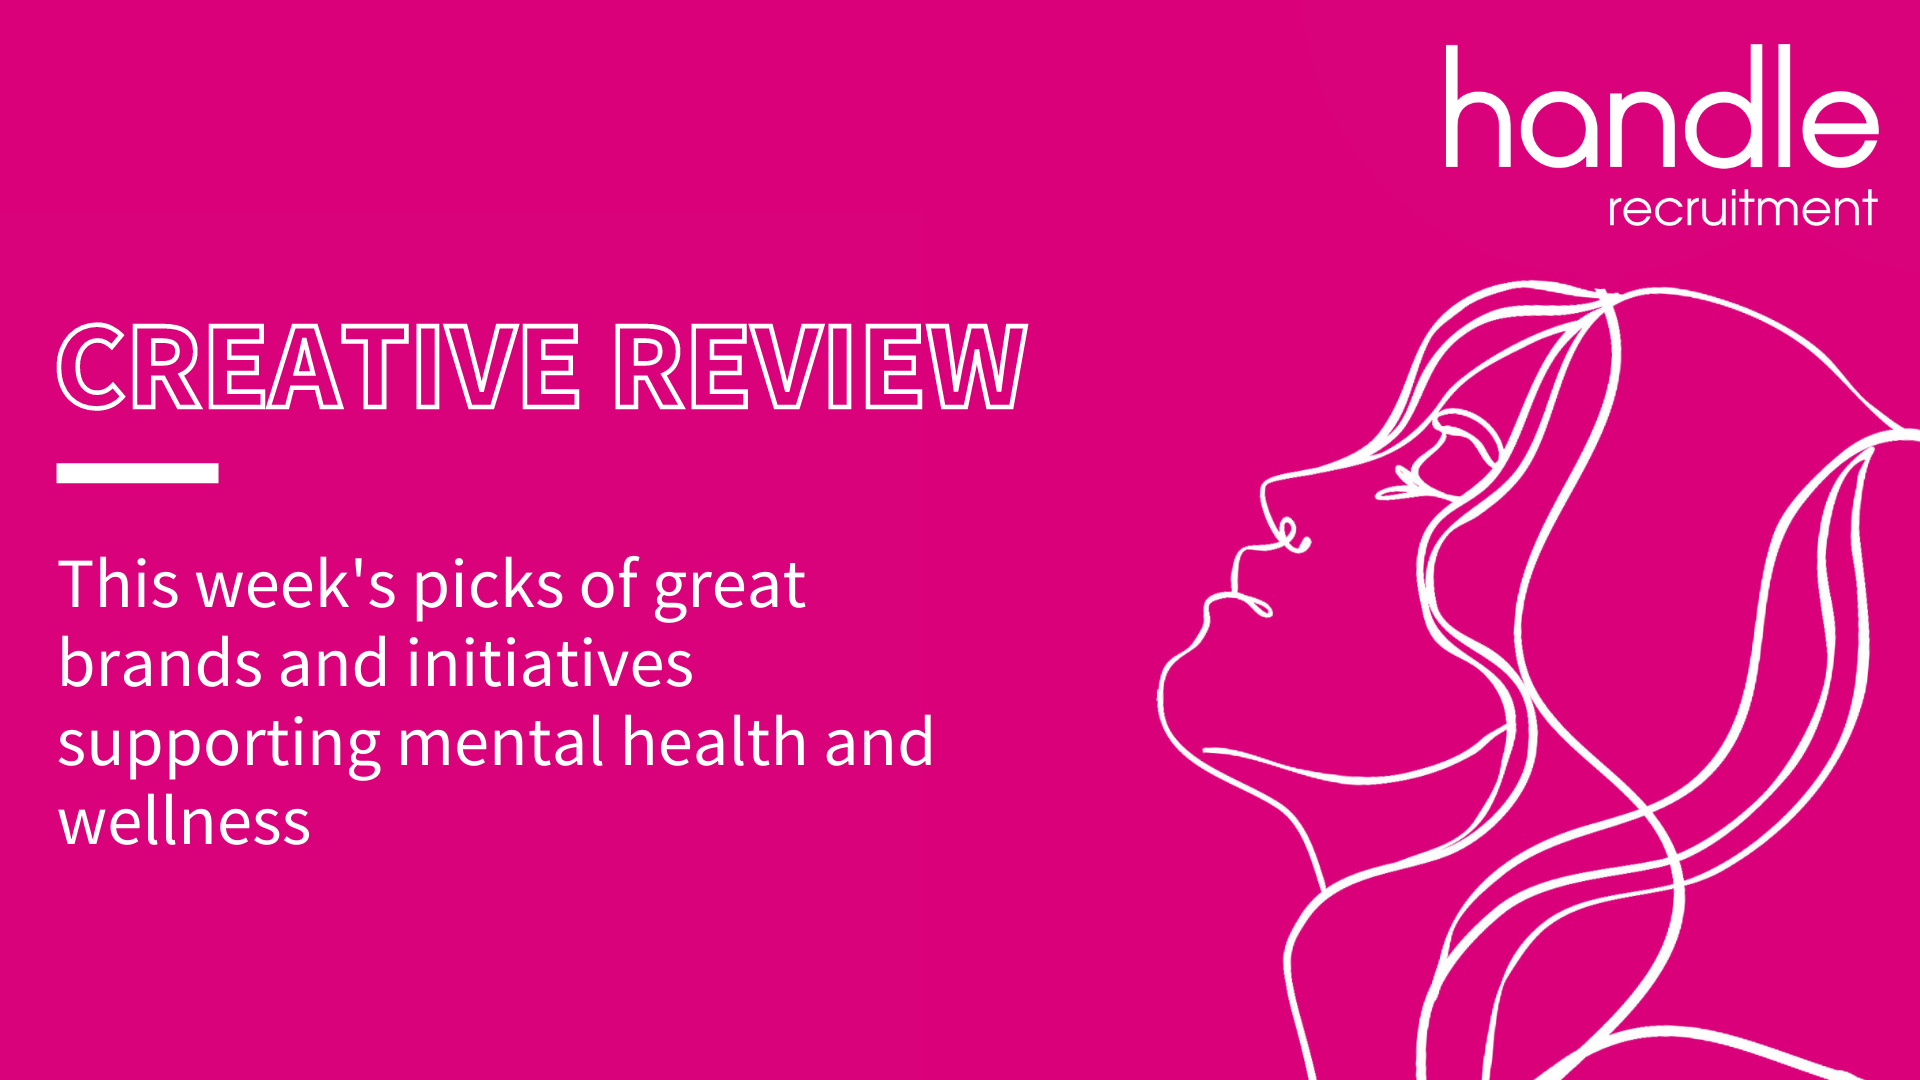 Creative Review for Mental Wellbeing - Handle Recruitment